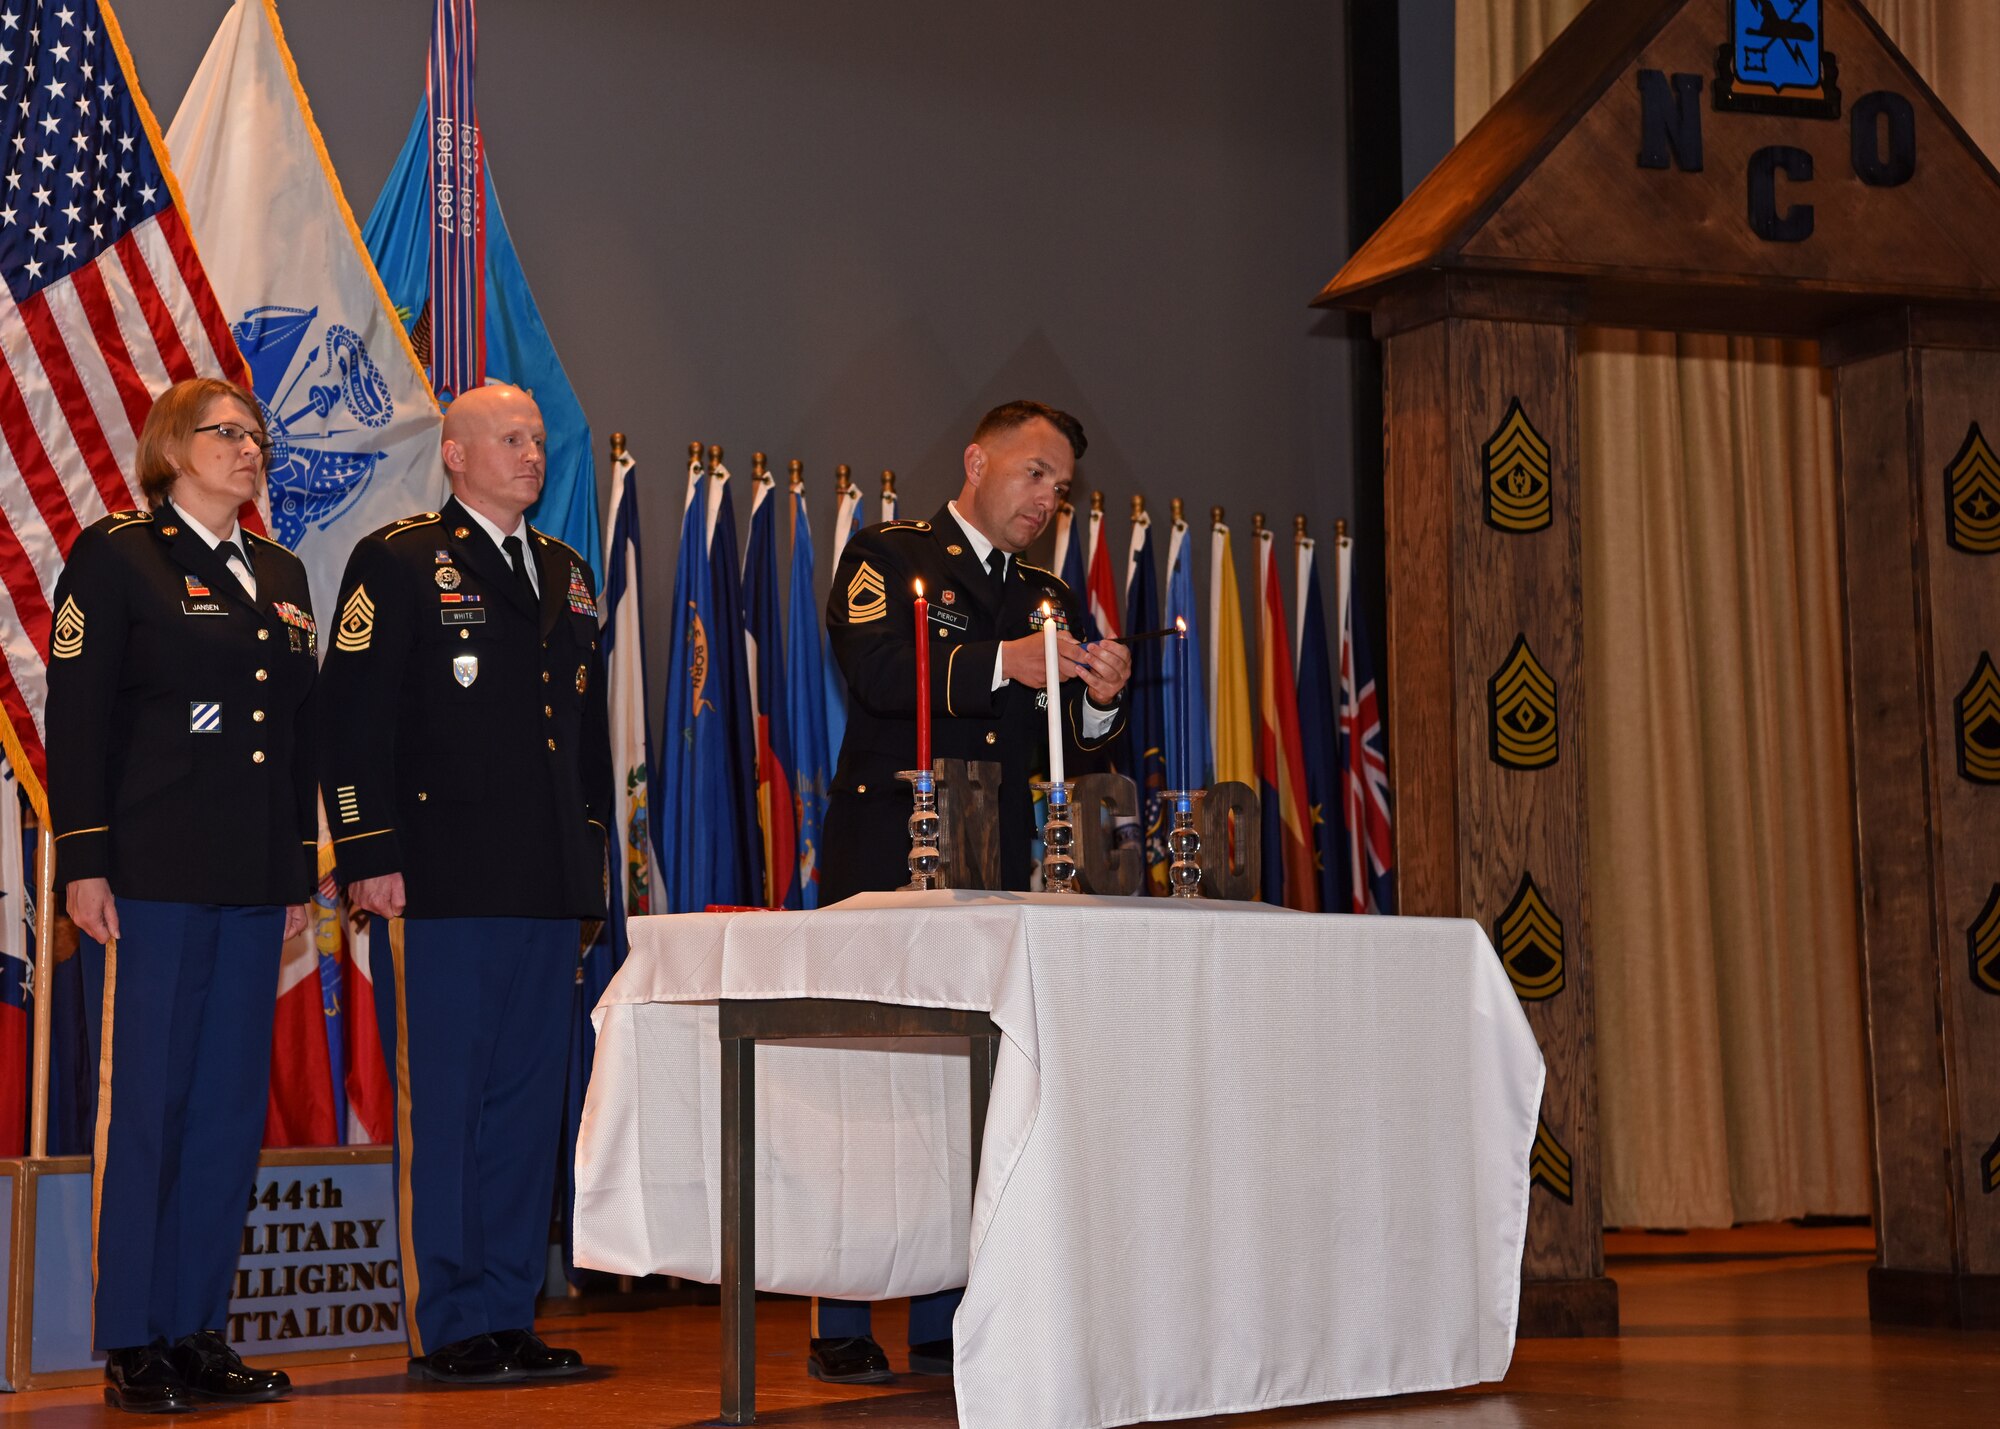 U.S. Army Master Sgt. Lorie Jansen, Master Sgt. Brandon White, and Master Sgt. Jason Piercy, members of the 344th Military Intelligence Battalion, light the candles at the Noncommissioned Officer Induction Ceremony at the base theater on Goodfellow Air Force Base, May 21, 2019. The candles symbolize the blood of soldiers who died for the country, the purity of the NCO, and the future of the NCO. (U.S. Air Force photo by Airman 1st Class Ethan Sherwood/Released)